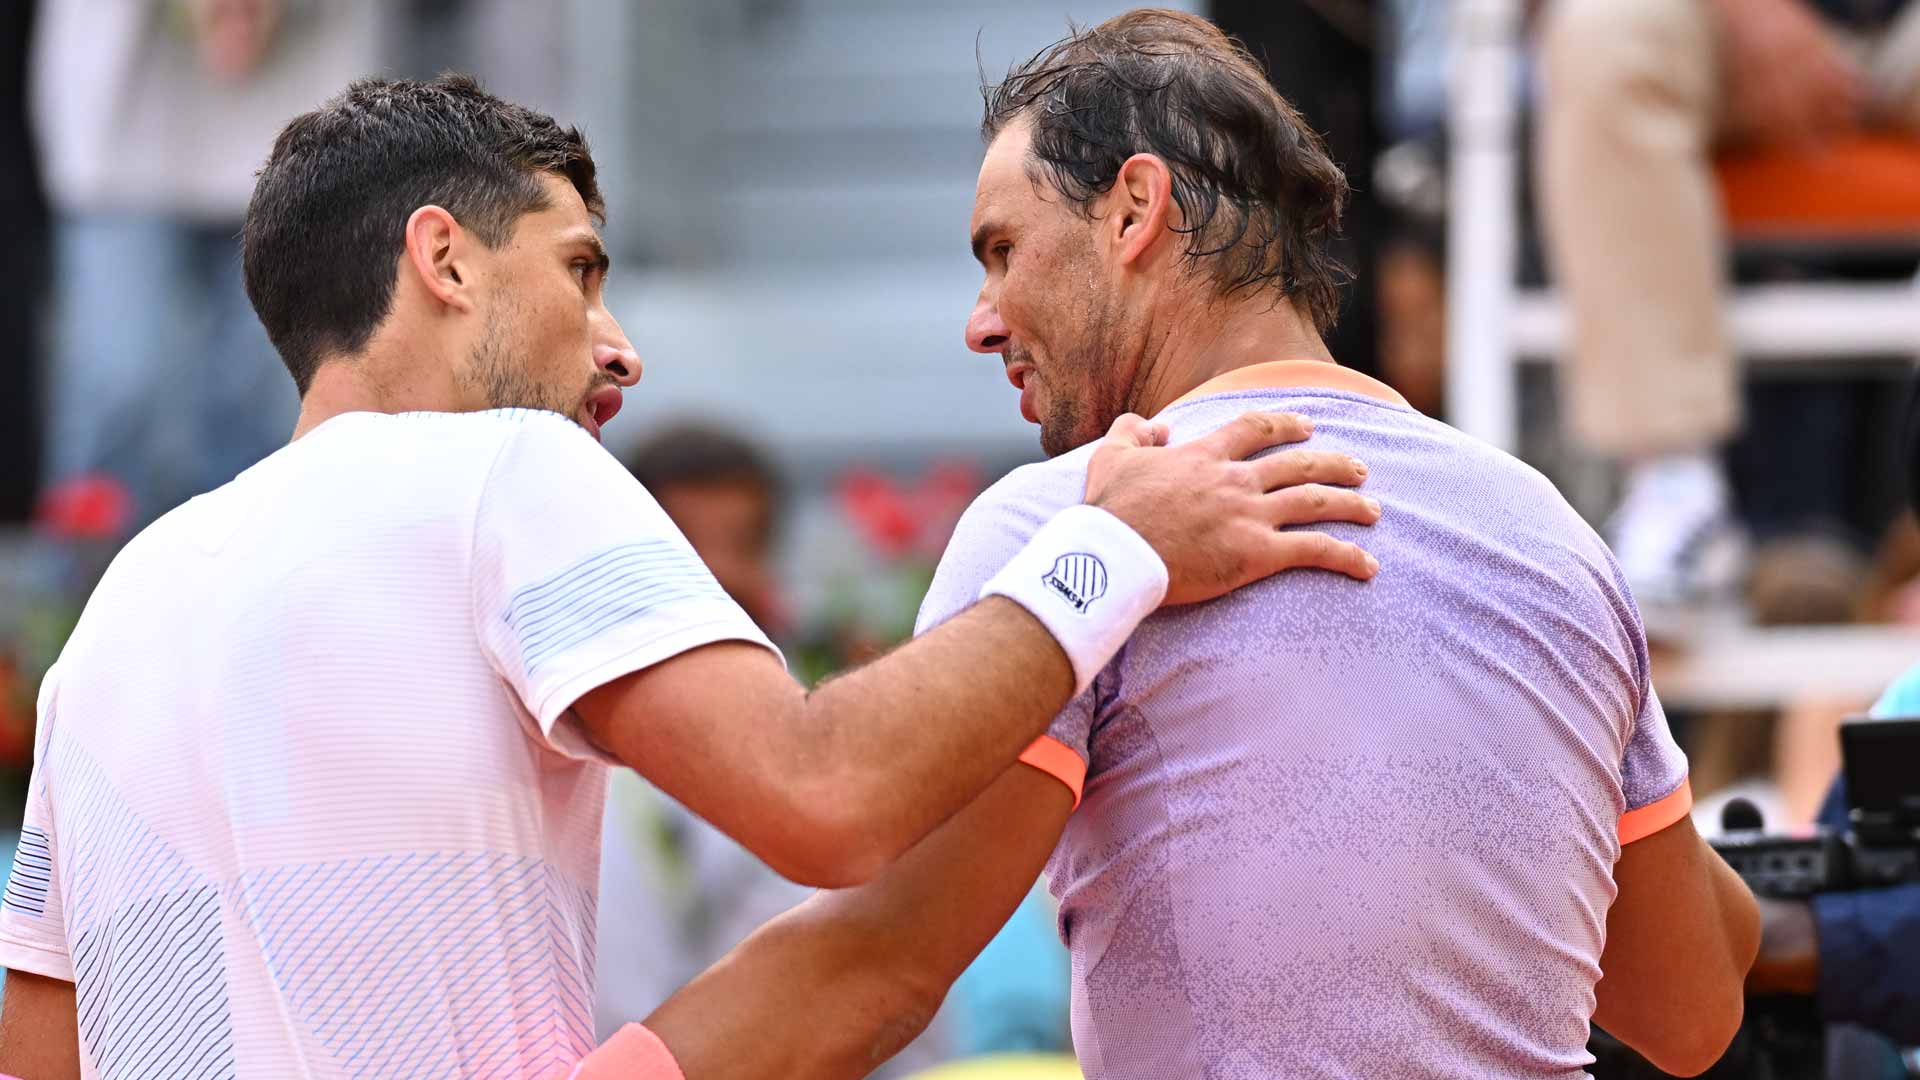 How Nadal made opponent's dream come true with memorable gesture